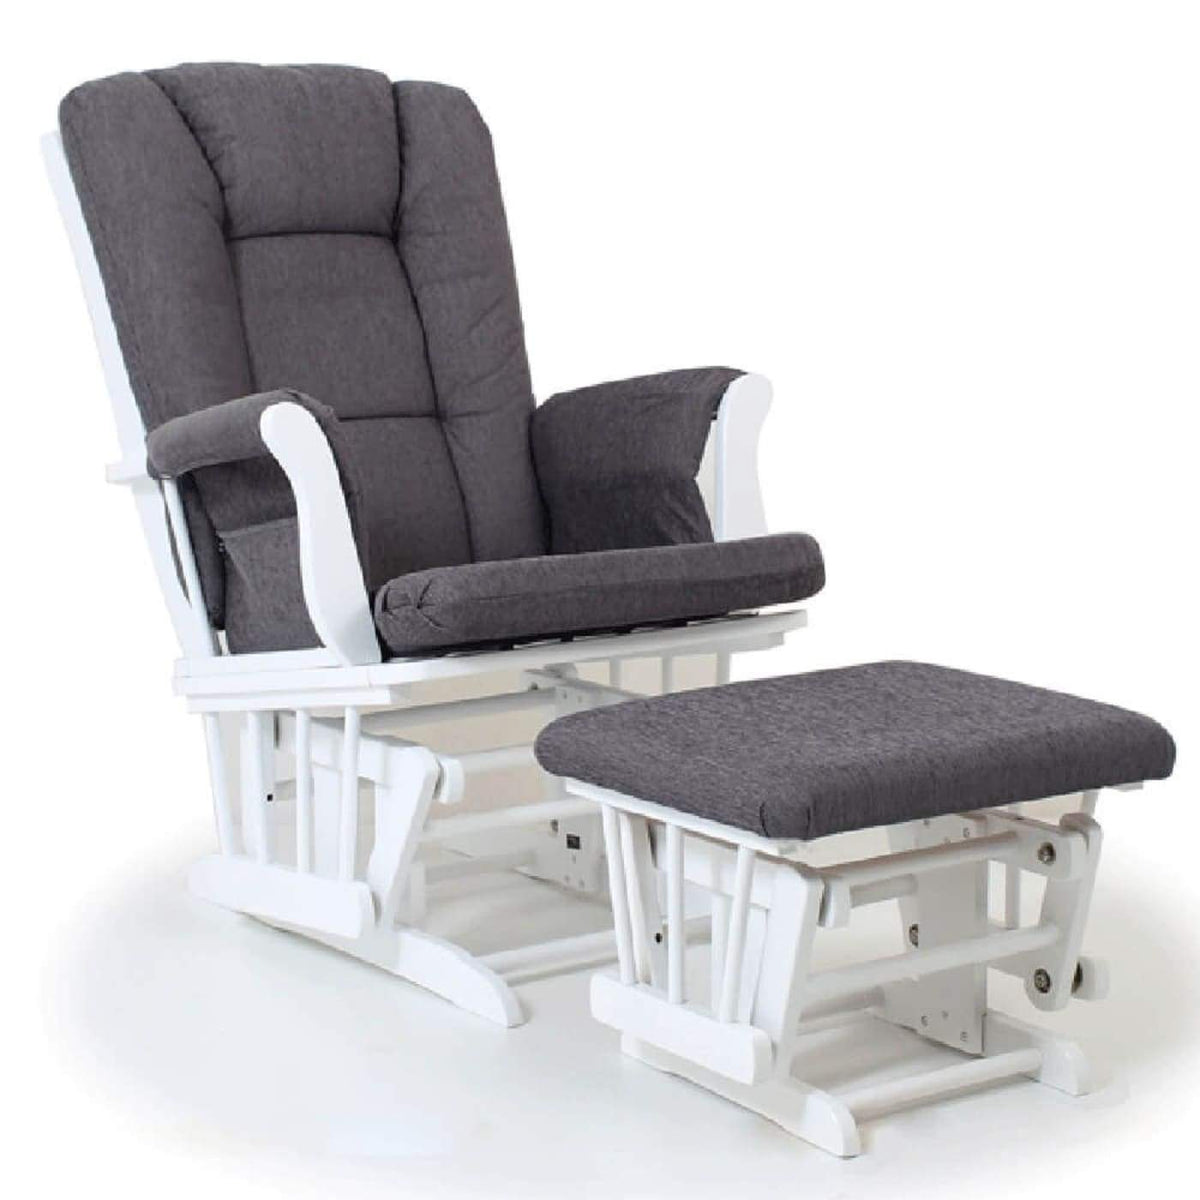 Valco Baby Bliss Glider - Antique Grey - Antique Grey - NURSERY &amp; BEDTIME - GLIDERS/ROCKING CHAIRS